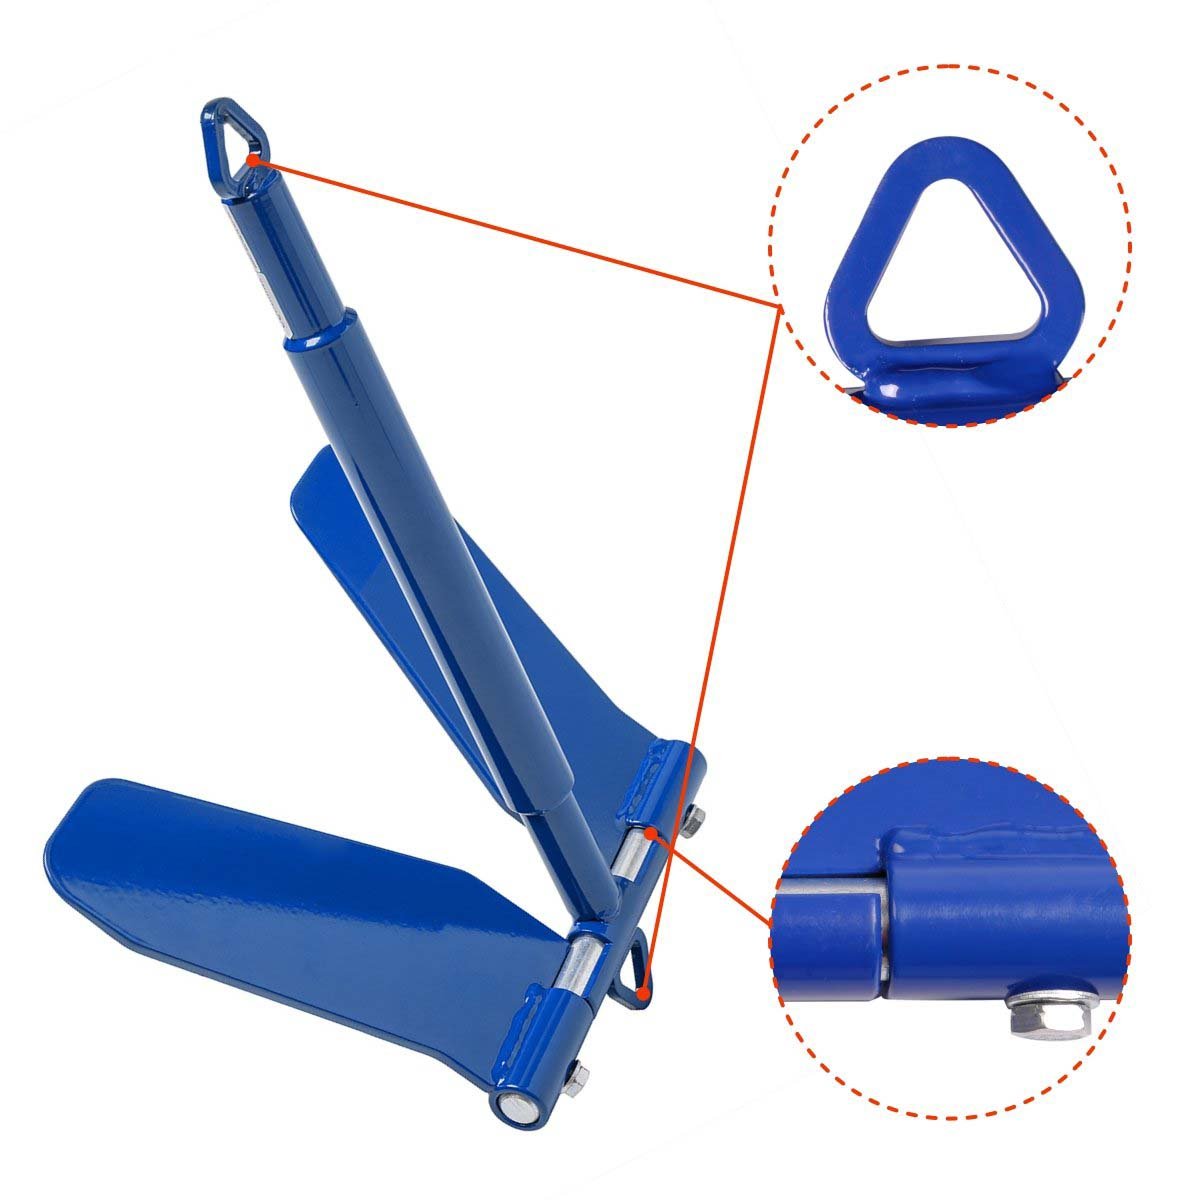 8.8 Lbs Danforth Anchor for Fishing, Canoe and Kayaking with movable flukes